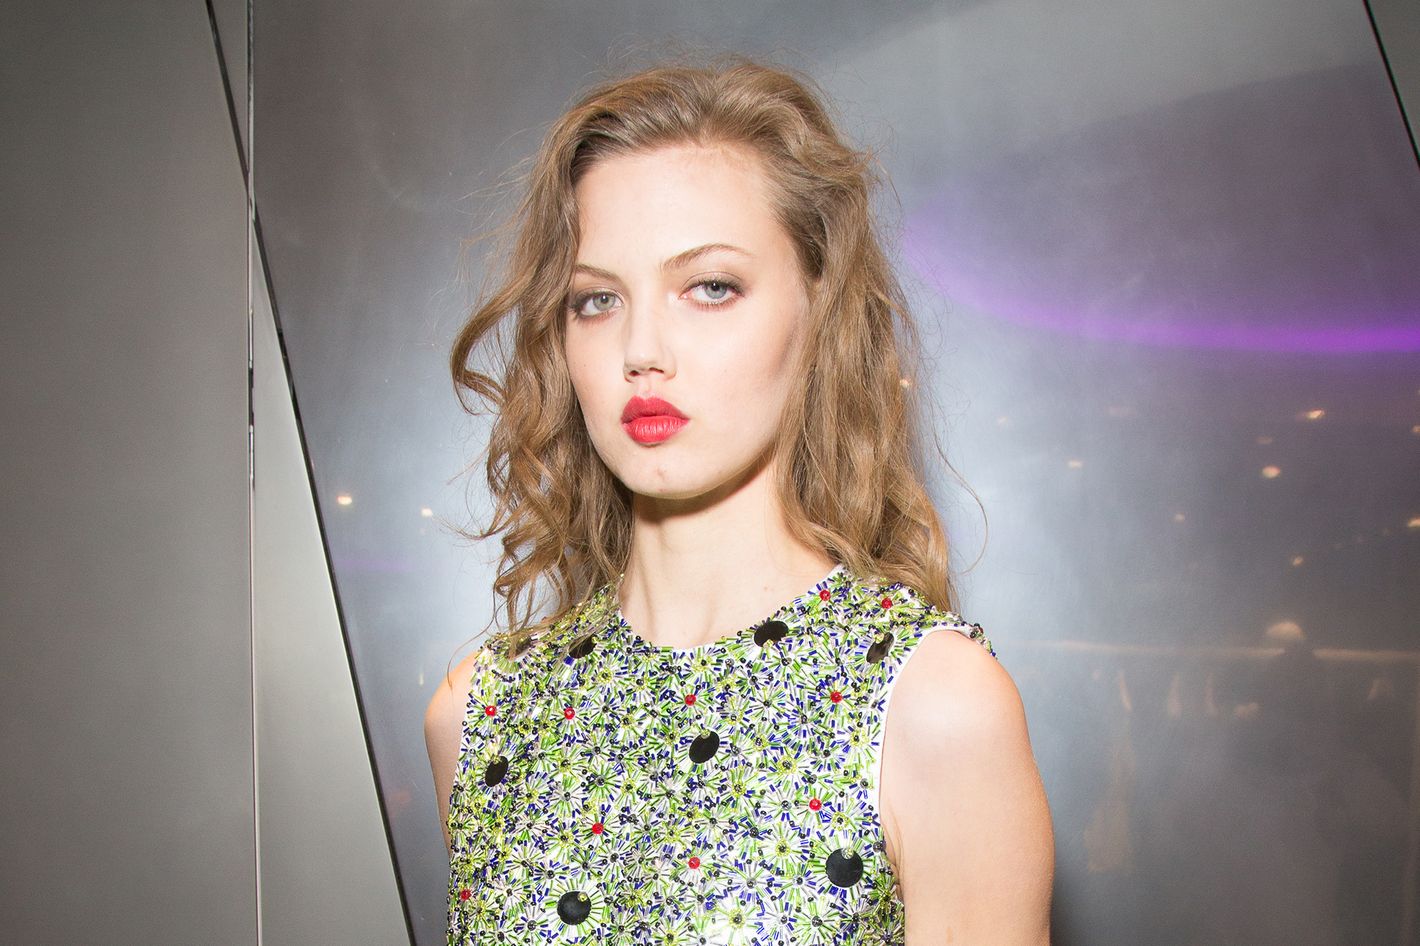 Model Lindsey Wixson Says Uber Driver Objectified Her